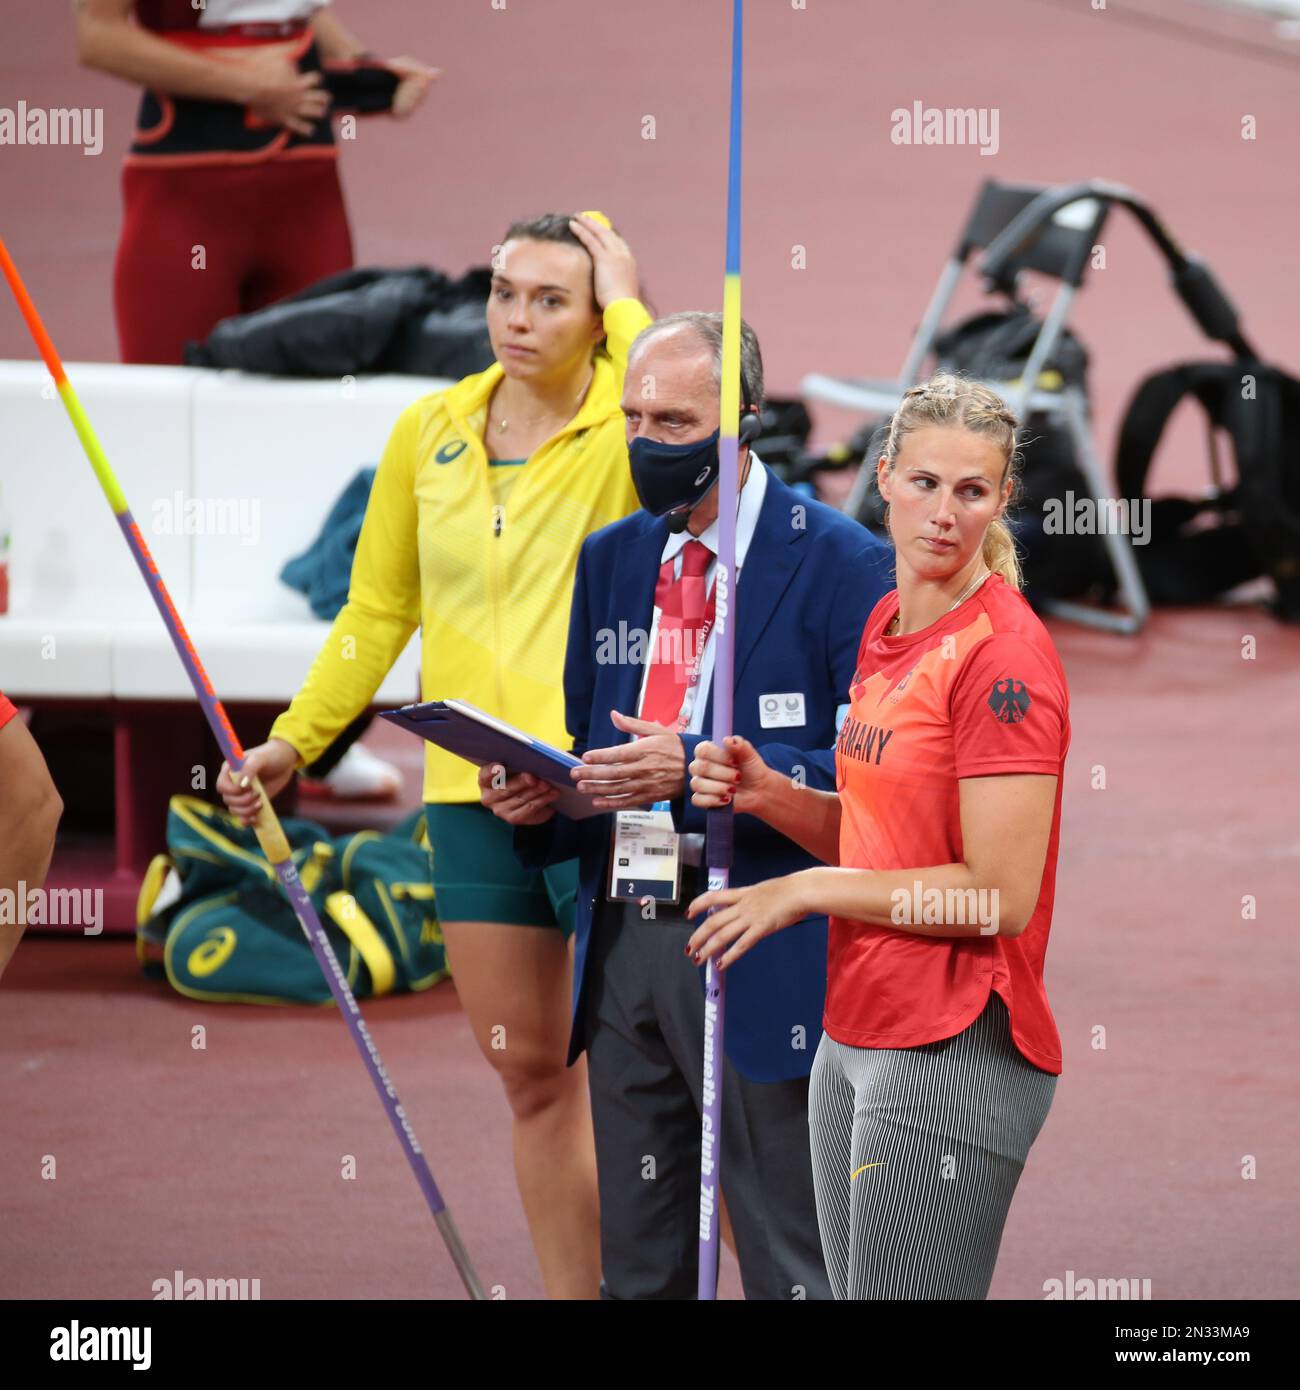 AUG 06, 2021 - Tokyo, Japan: Kelsey-Lee BARBER of Australia and Christin HUSSONG of Germany in the Athletics Women's Javelin Throw Final at the Tokyo Stock Photo